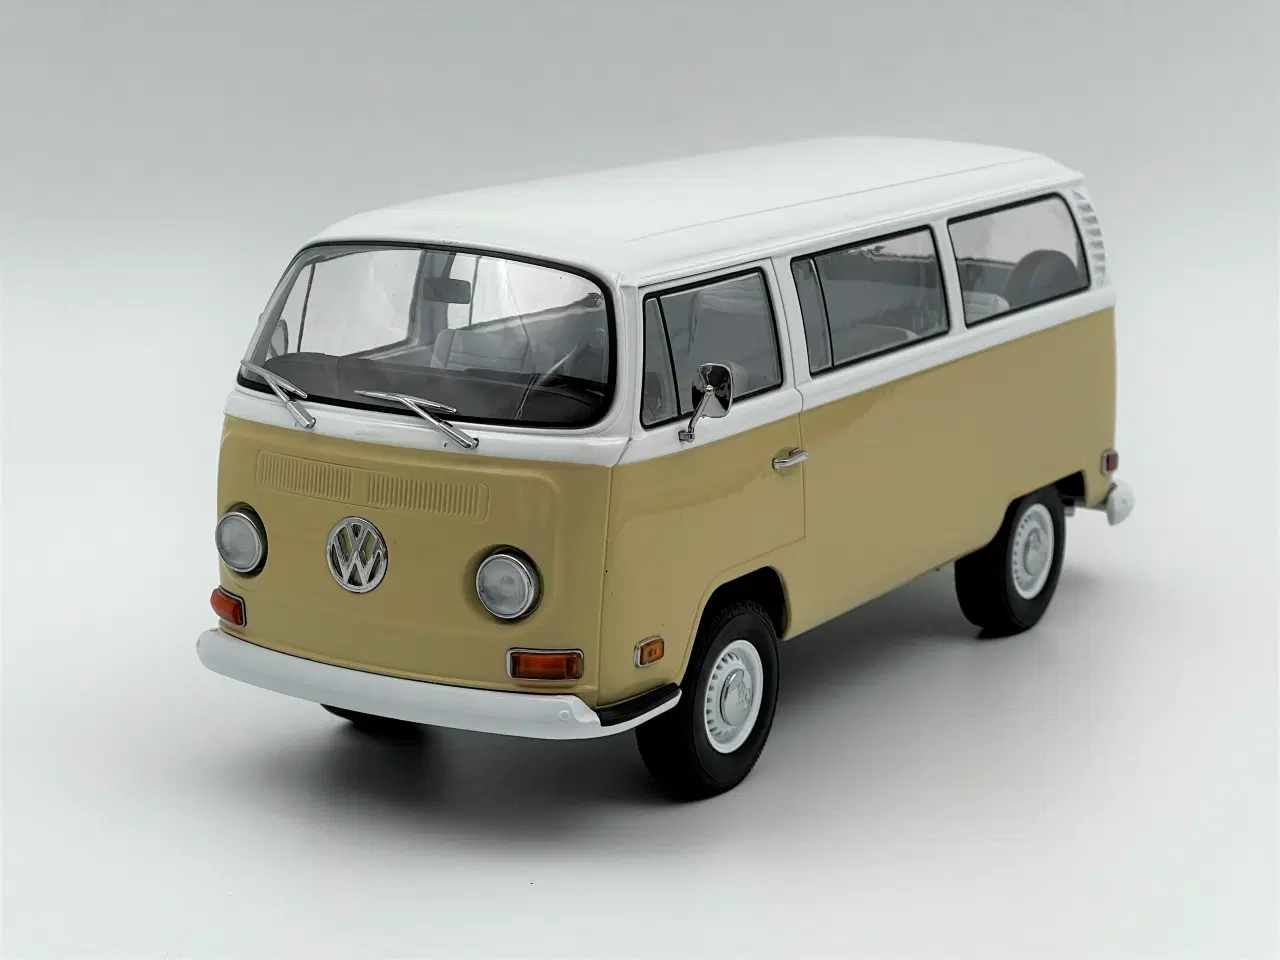 Billede 1 - 1971 VW T2a "Early Bay" Bus Limited Edition 1:18